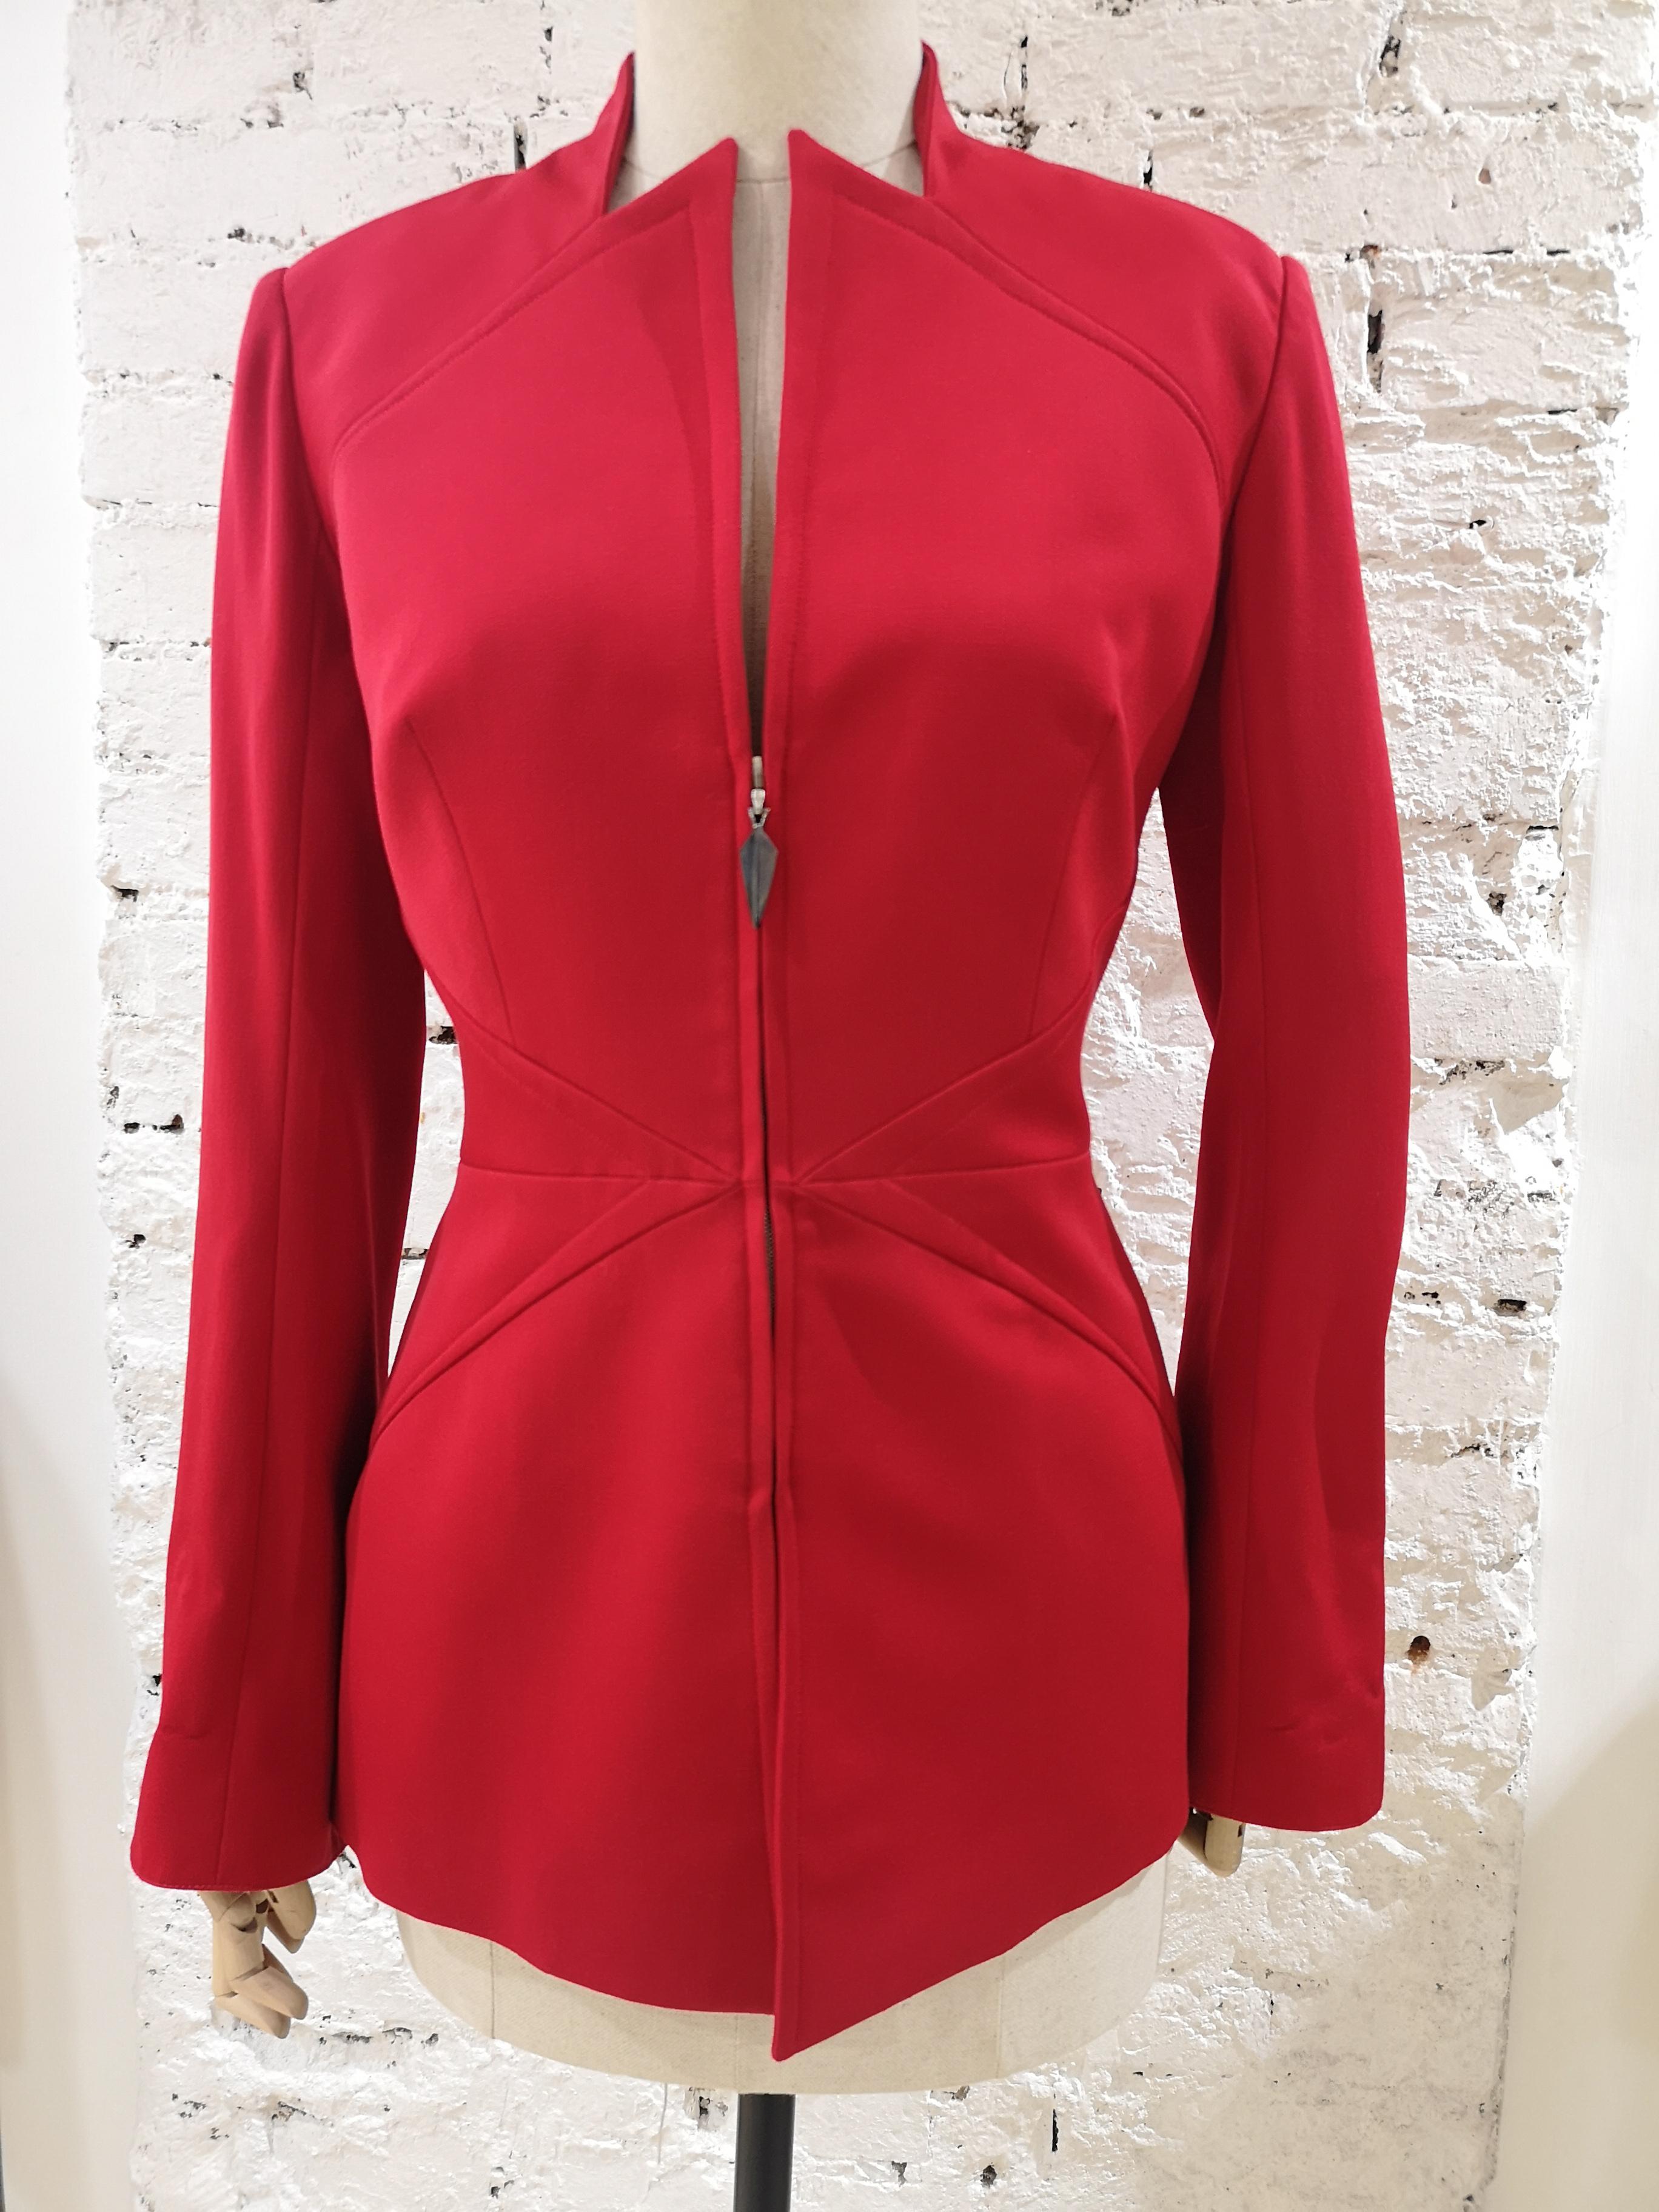 Thierry Mugler Red Jacket
silver tone zip and closure
asymmetric style
total lenght 74 cm
shoulder to hem 37 cm